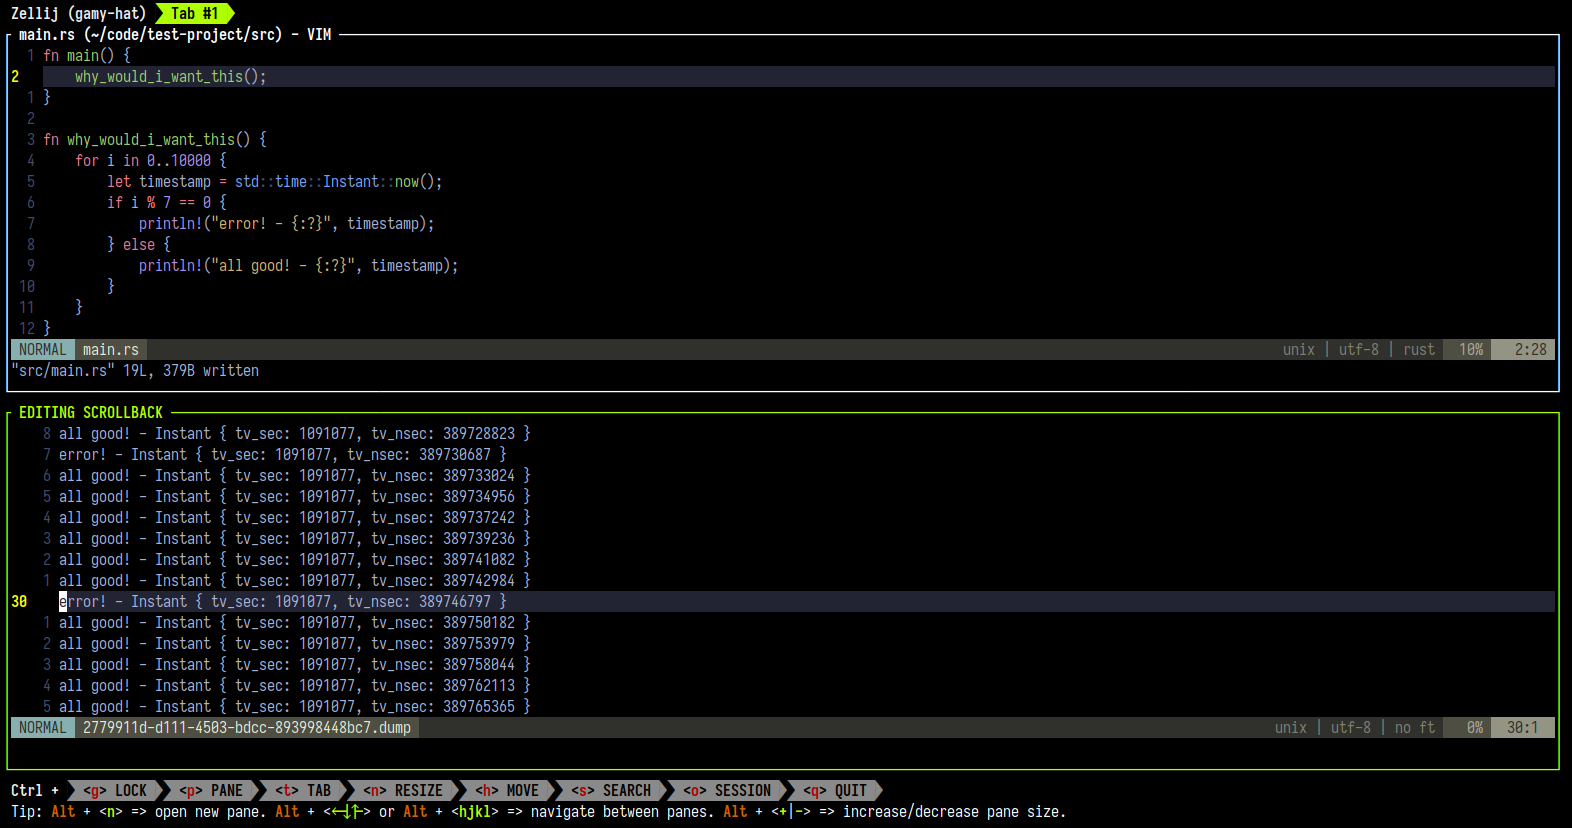 An image of Zellij with a pane open to the vim editor editing its own scrollback